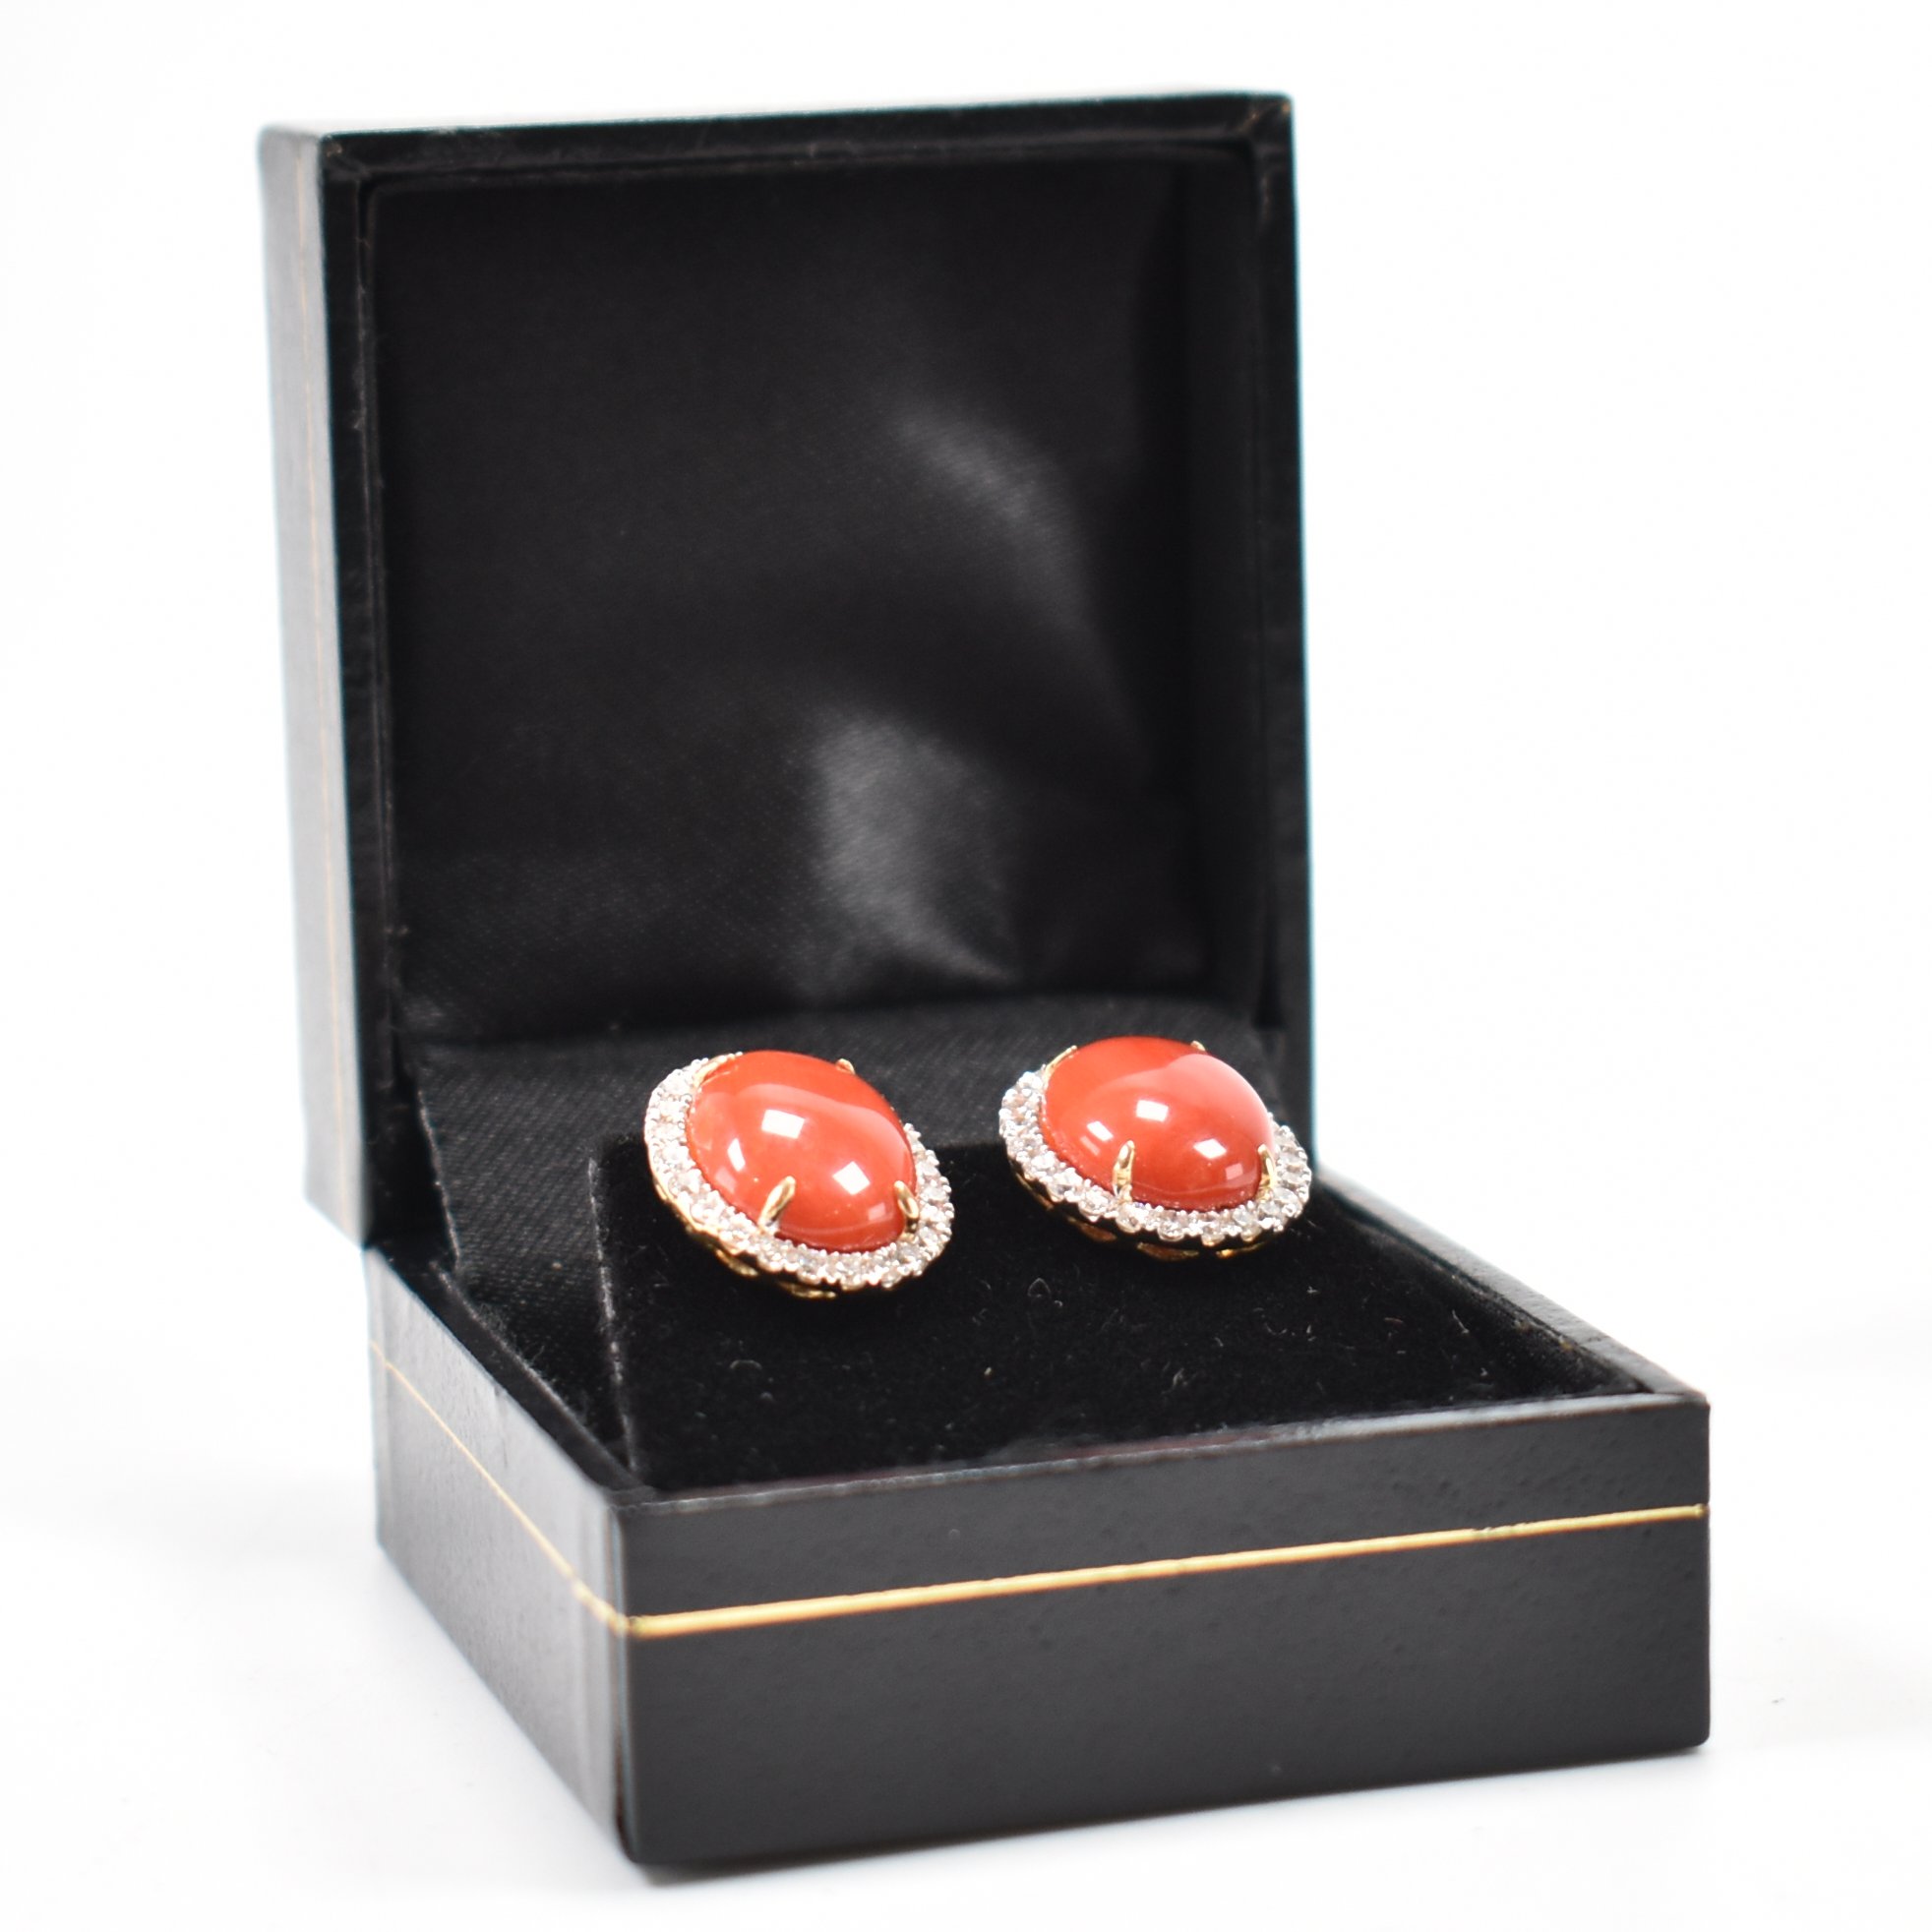 PAIR OF 18CT GOLD CORAL & DIAMOND EARRINGS - Image 4 of 4